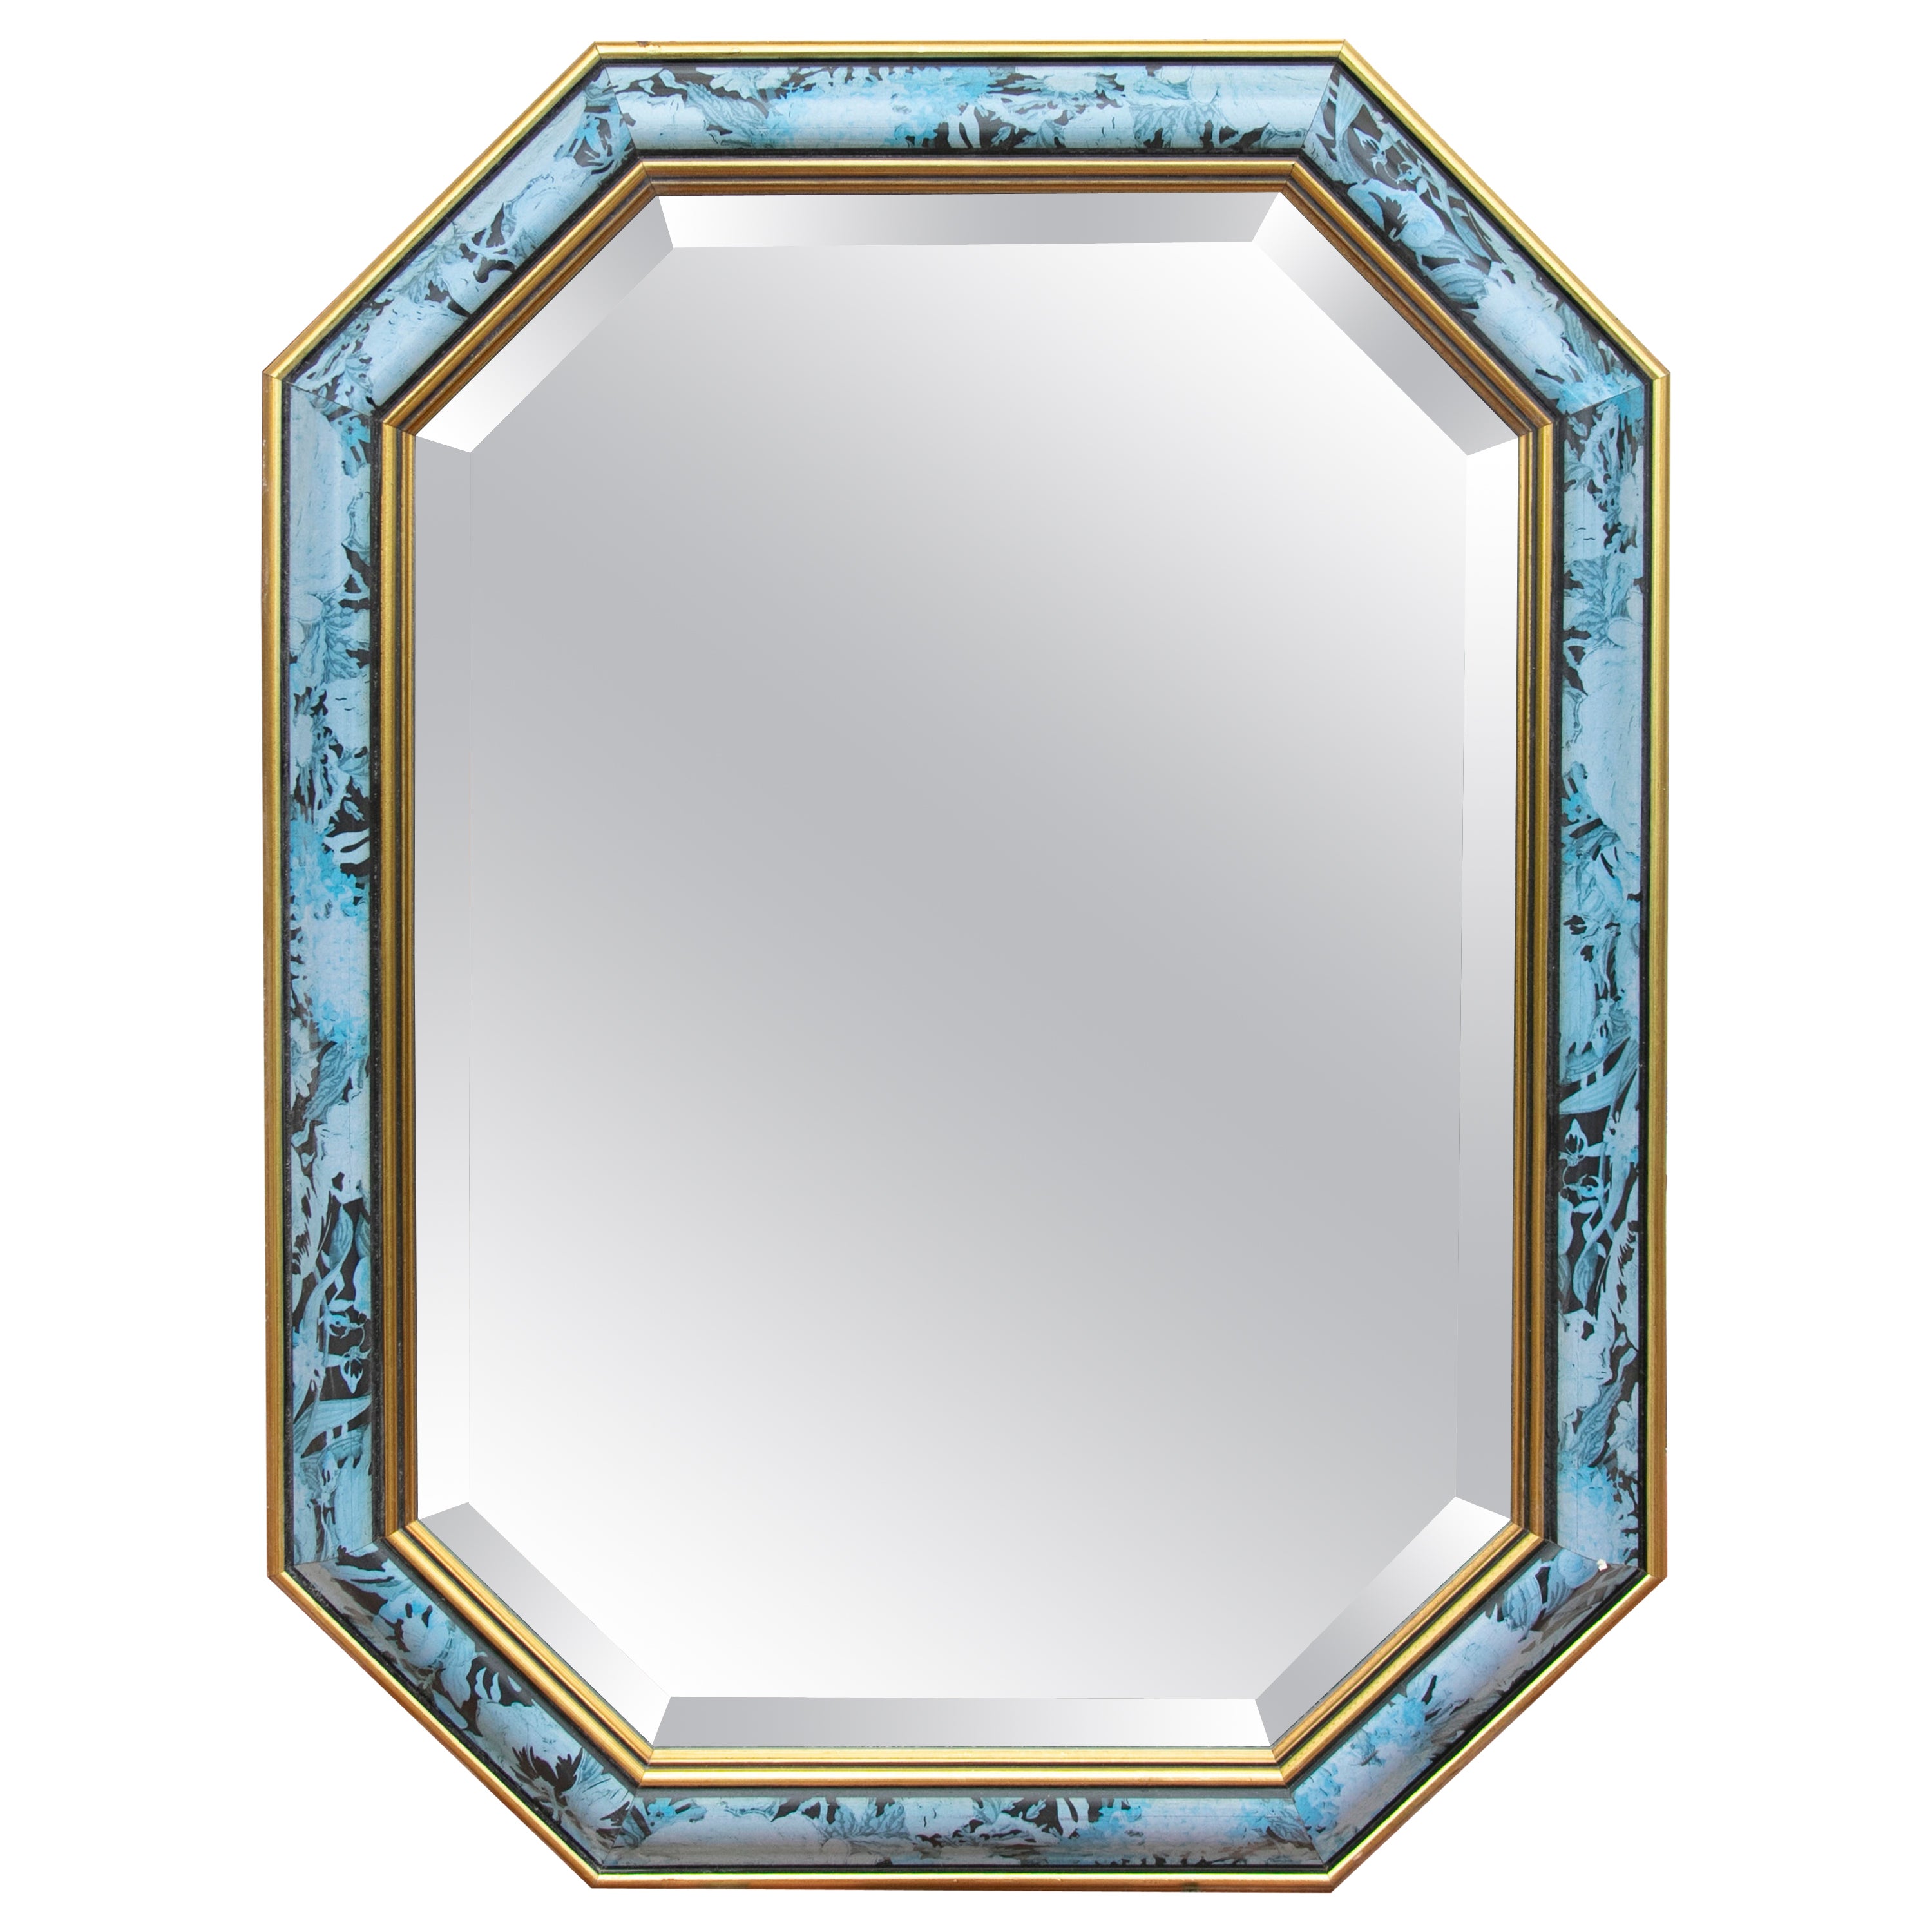 1980s Wooden Wall Mirror with Flower Decoration in Blue Tones